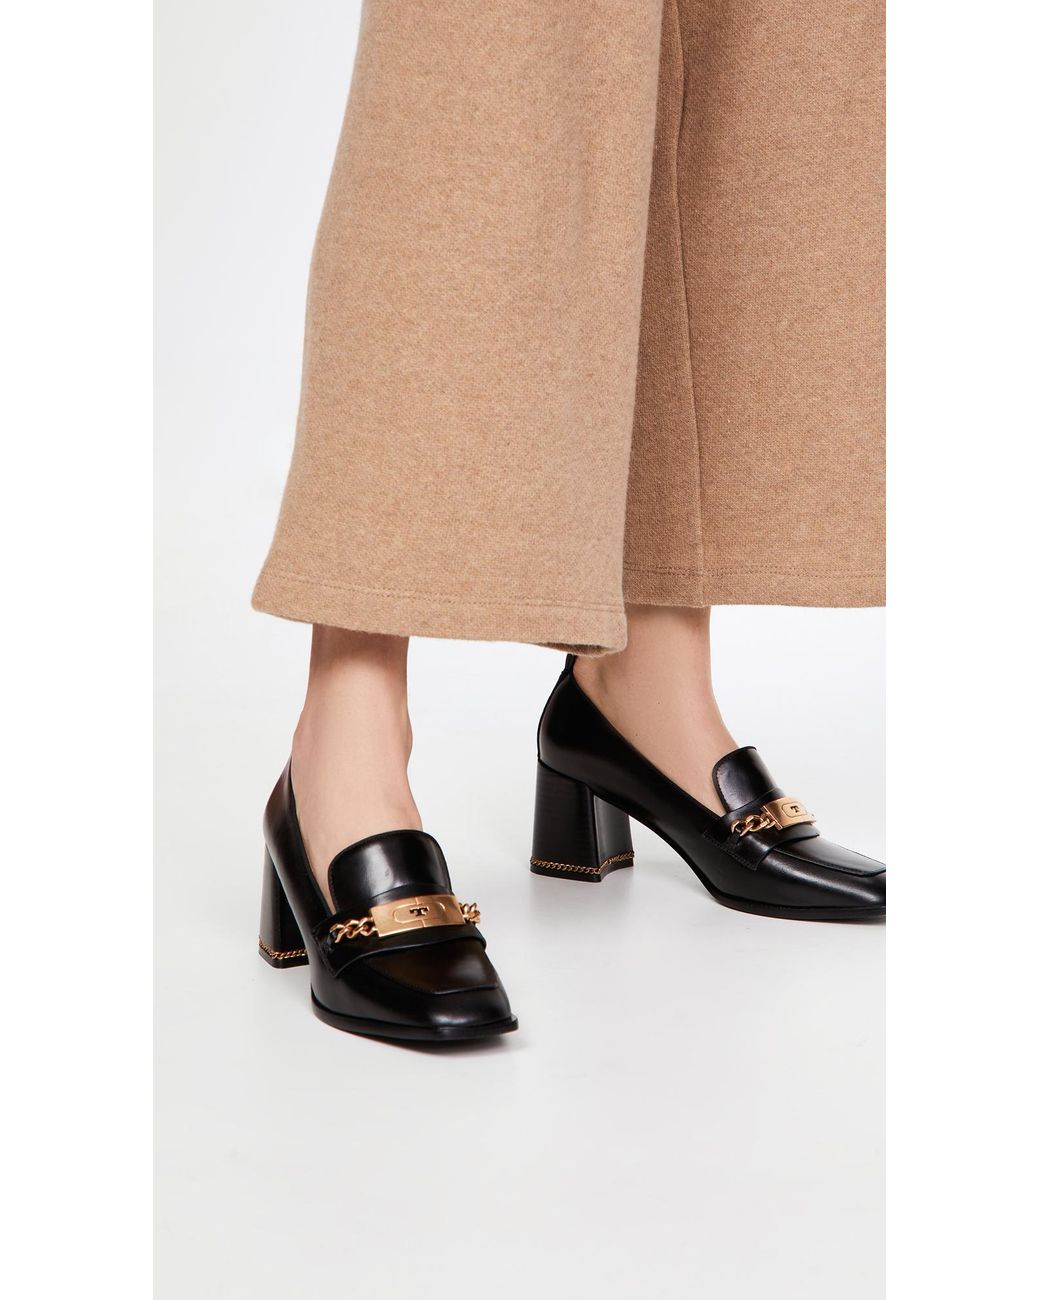 Tory Burch Chain 70mm Loafers in Black | Lyst